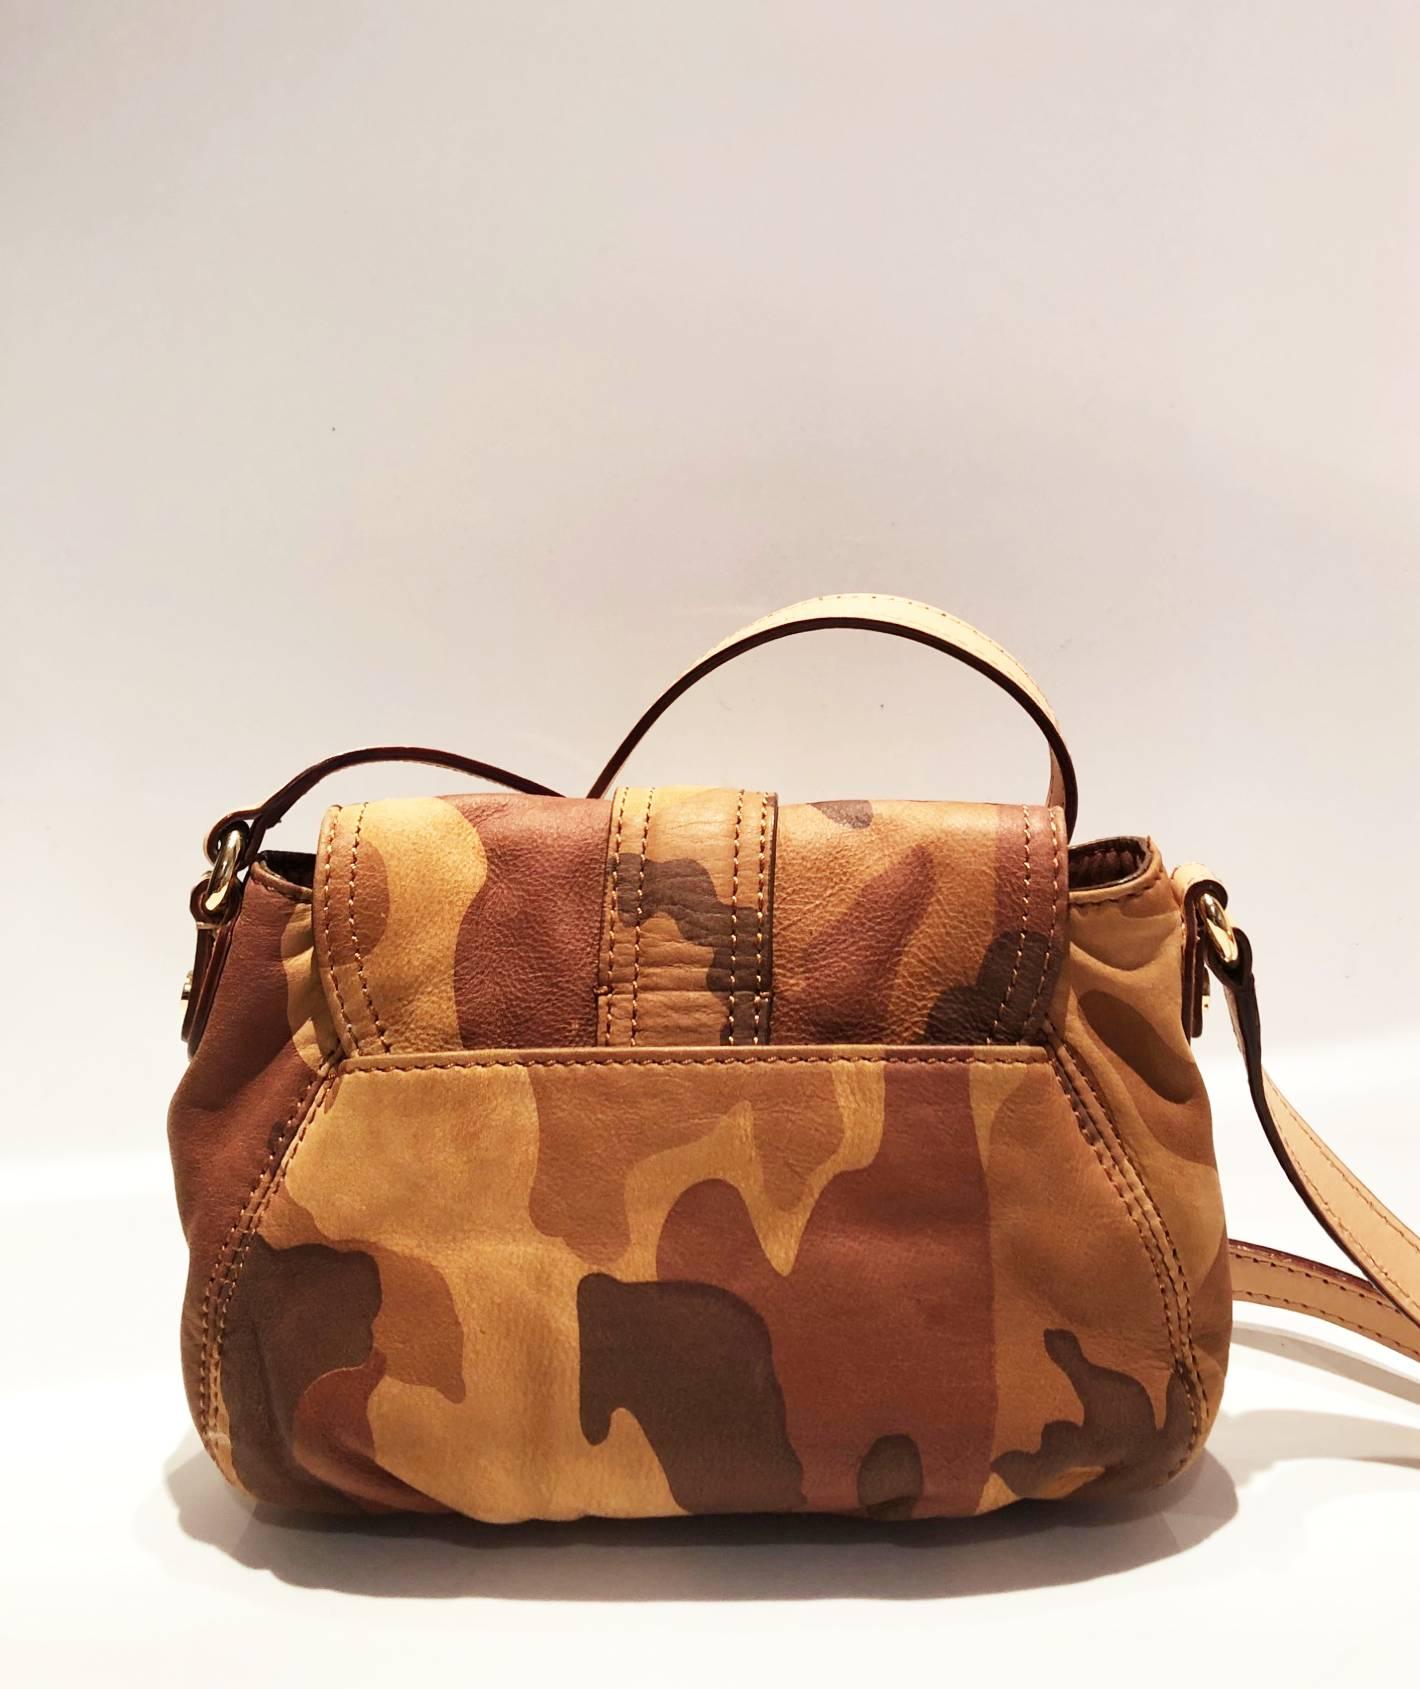 FREE UK and WORLDWIDE DELIVERY 
Multi colour camouflage brown leather small bag from Michael Michael Kors featuring a detachable shoulder leather strap, a camouflage print, multiple interior compartments, a padlock fastening clutch closure, small